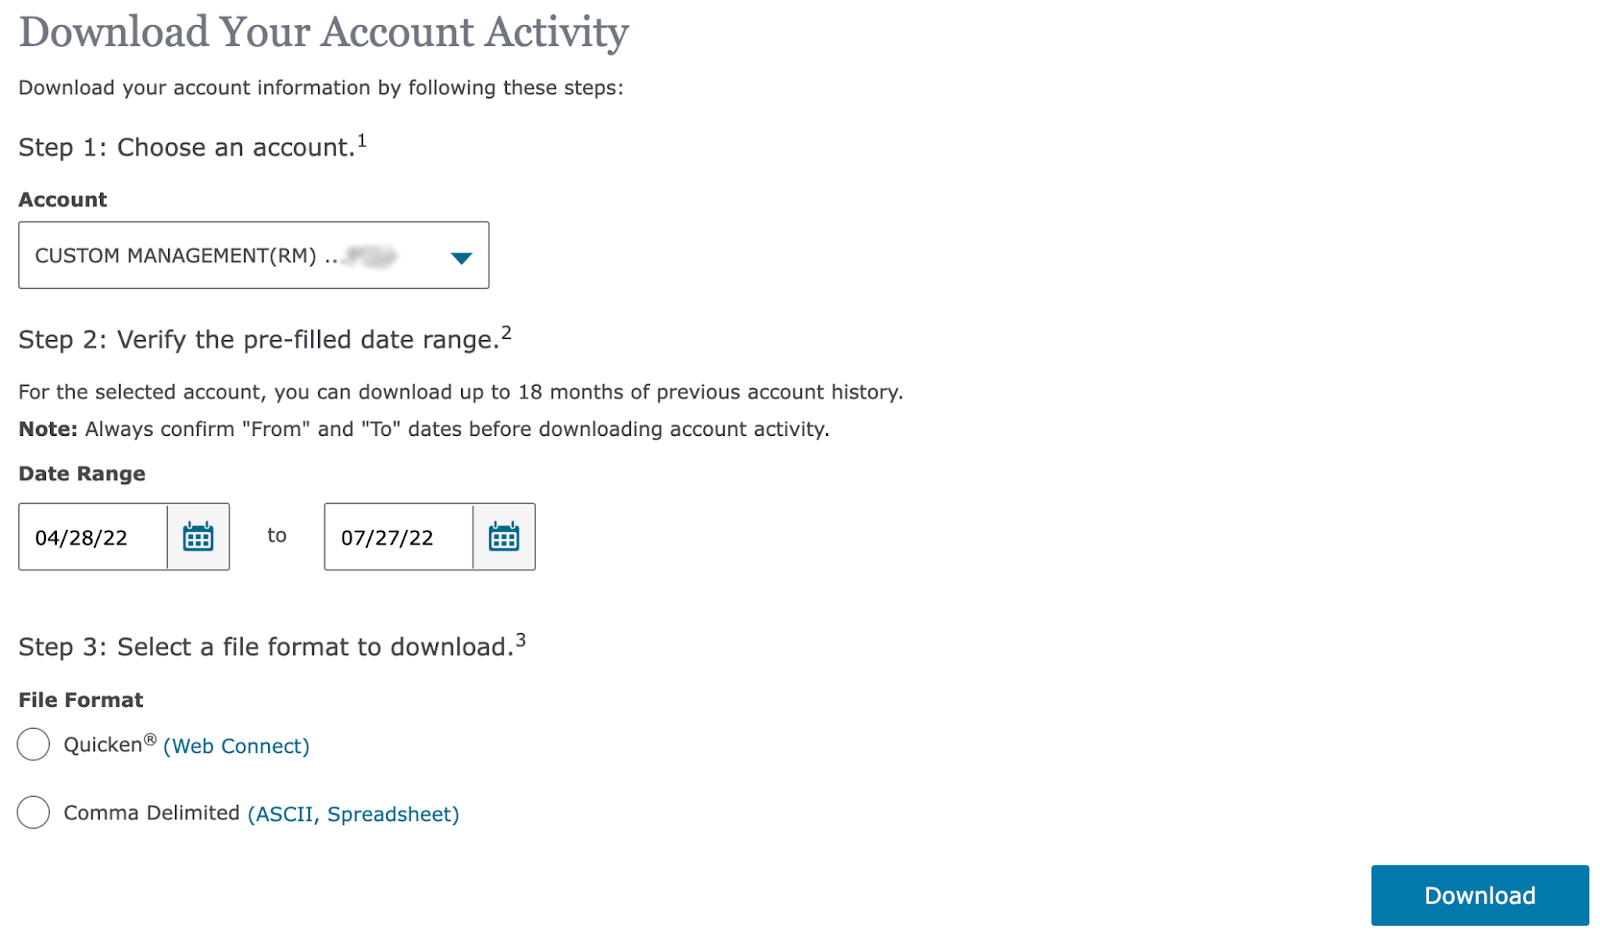 Download account activity page for Wells Fargo
